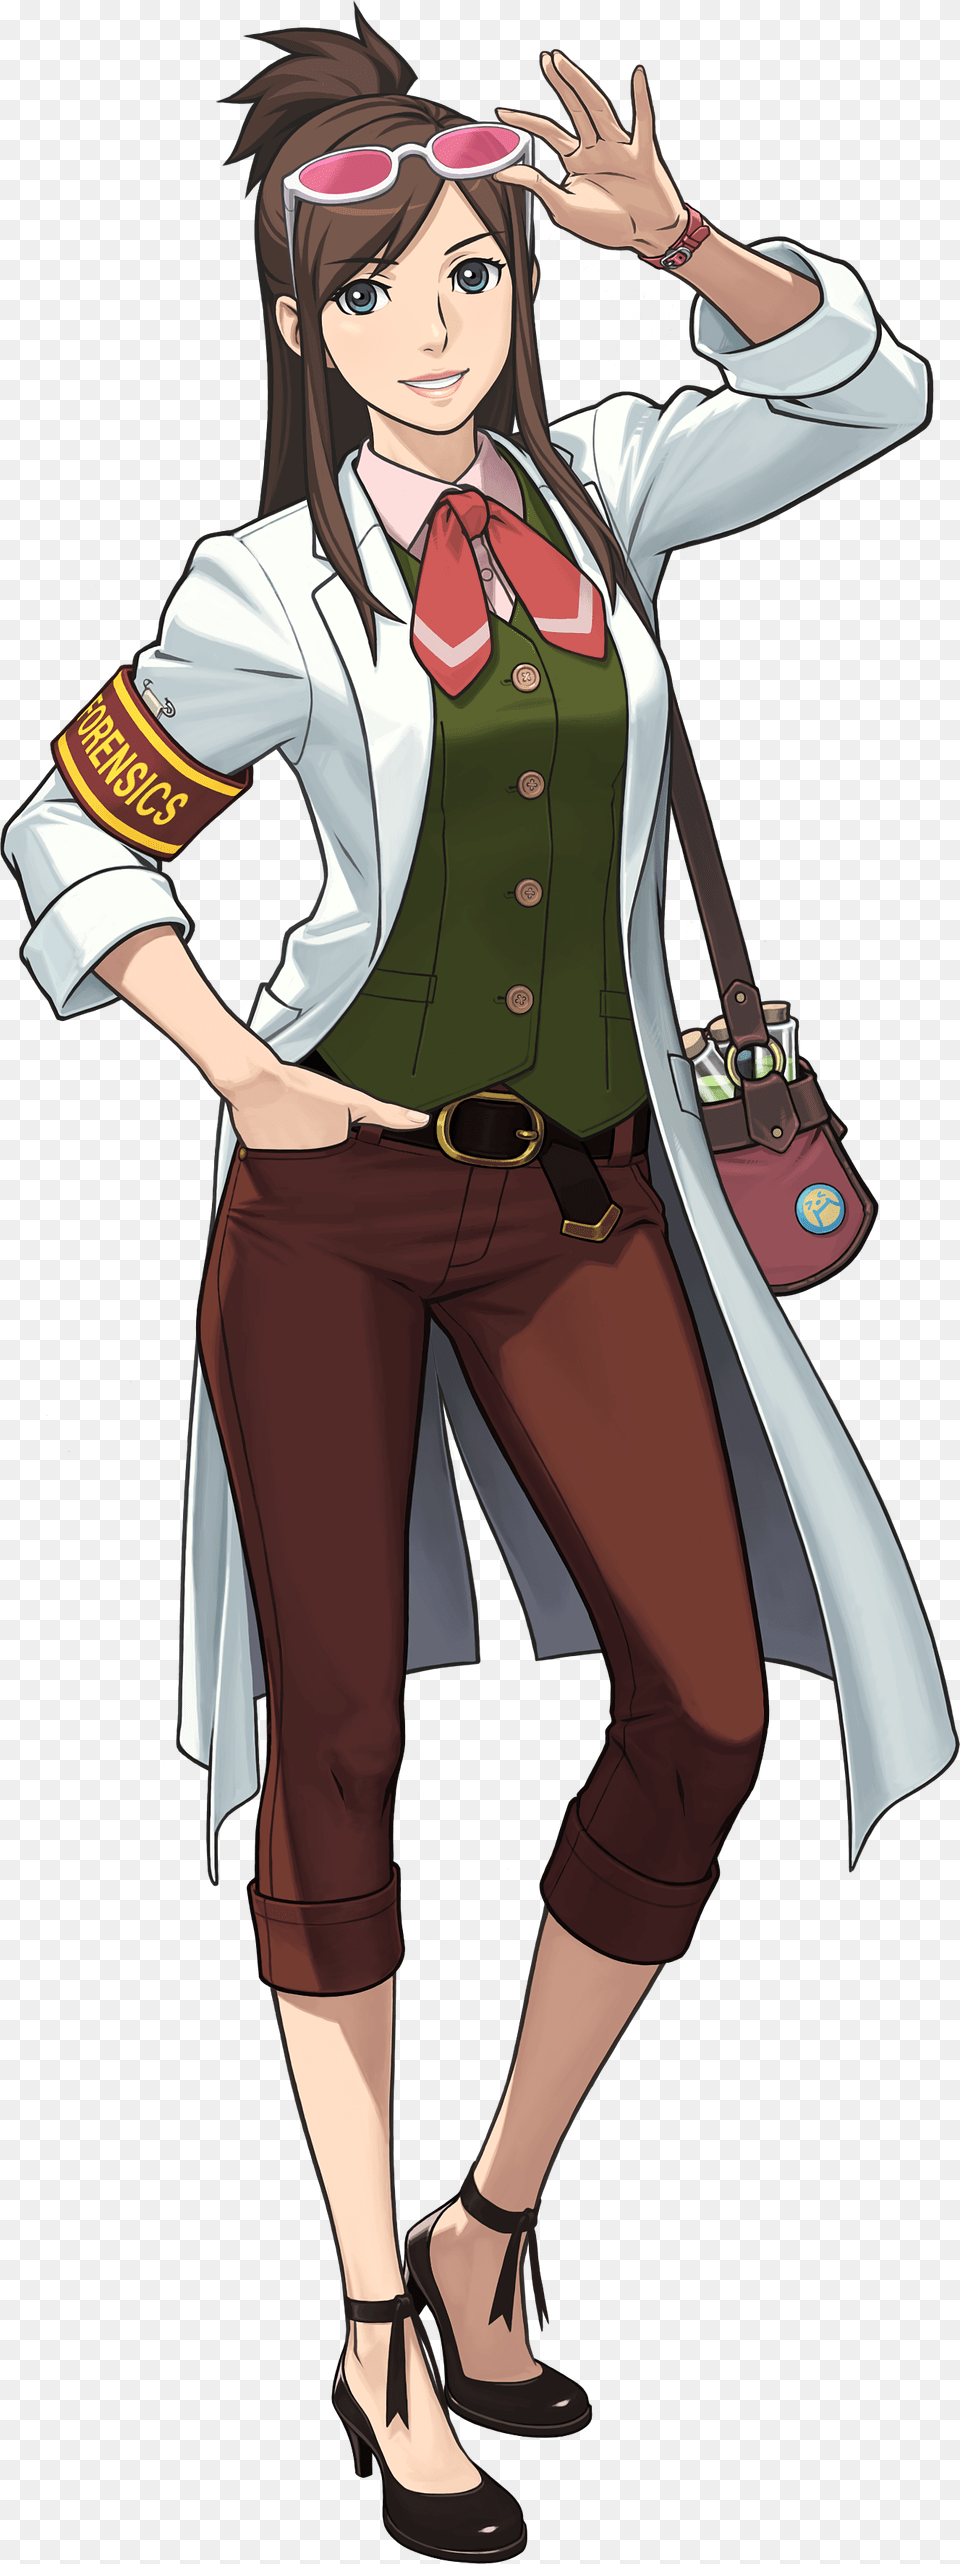 Ema Skye Ace Attorney, Book, Publication, Comics, Woman Png Image